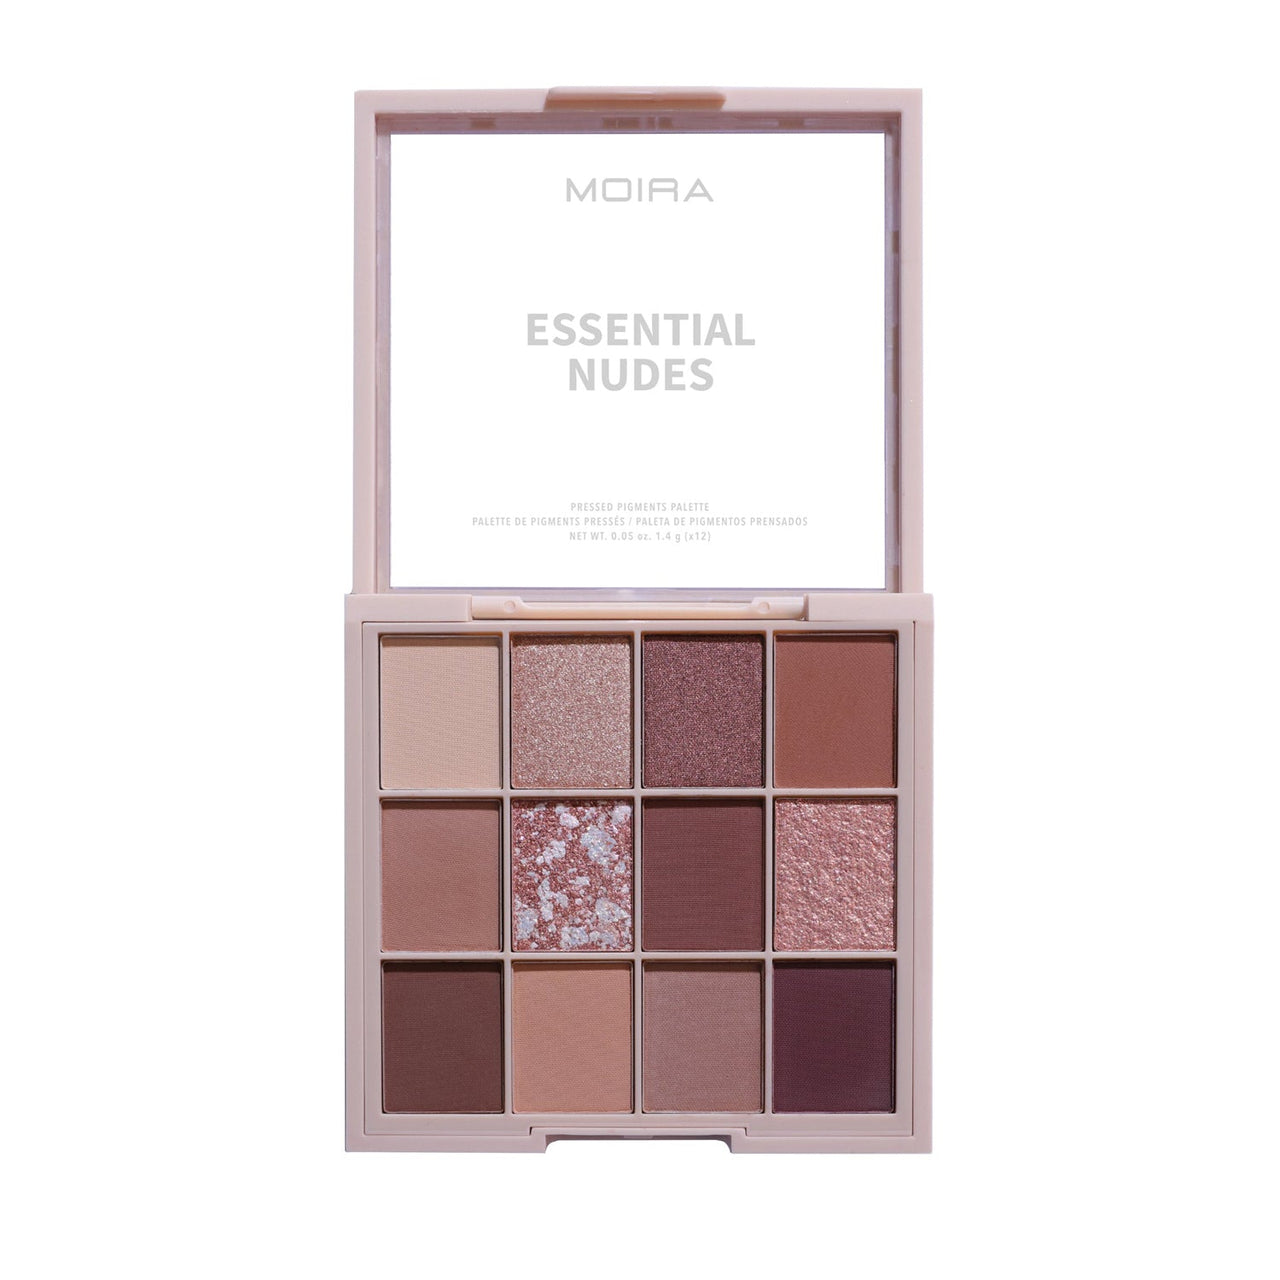 MOIRA Pressed Pigments Palette -  Essential Nudes